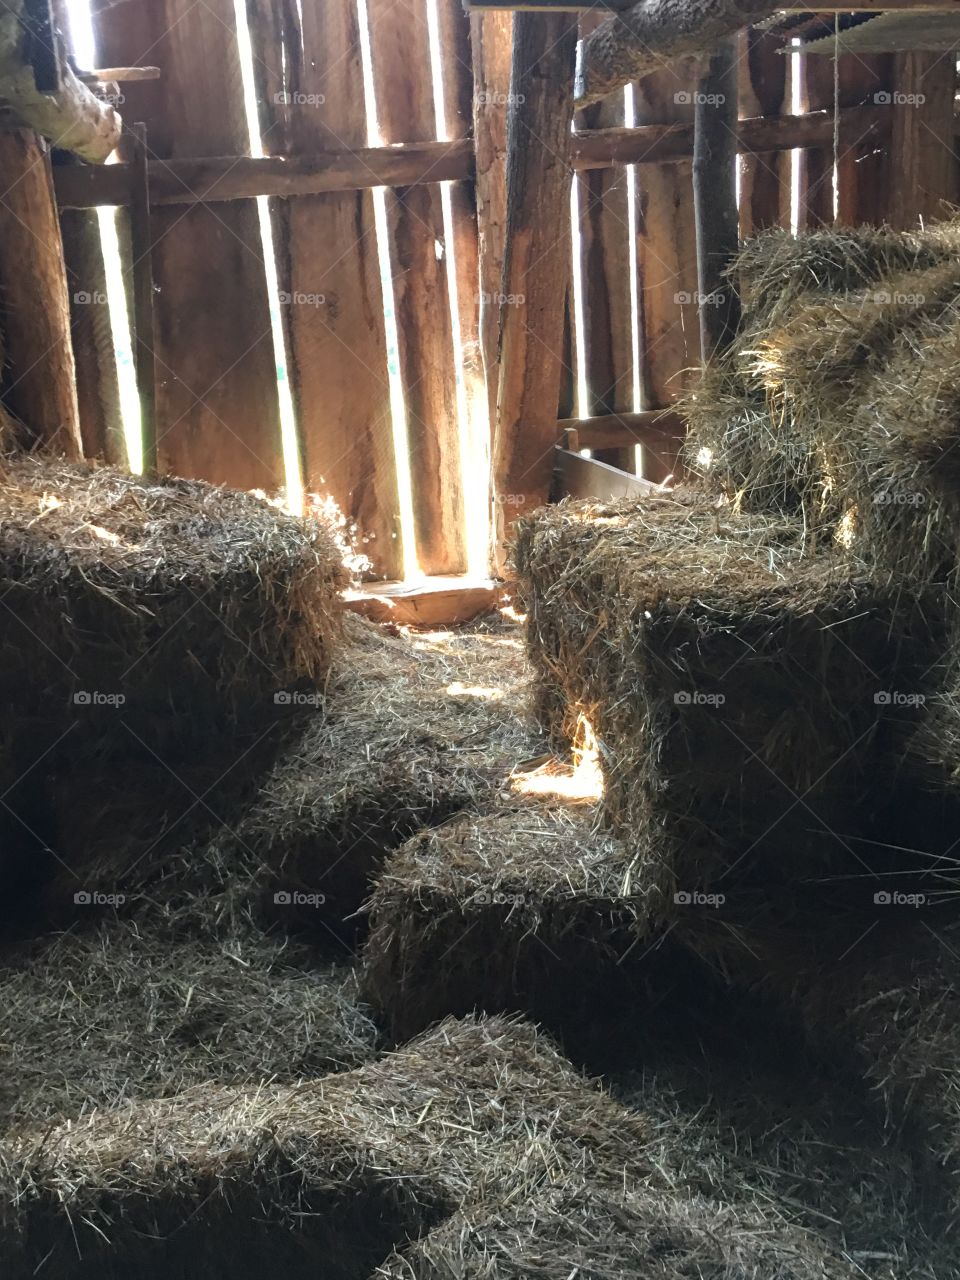  Hay stacked in barn